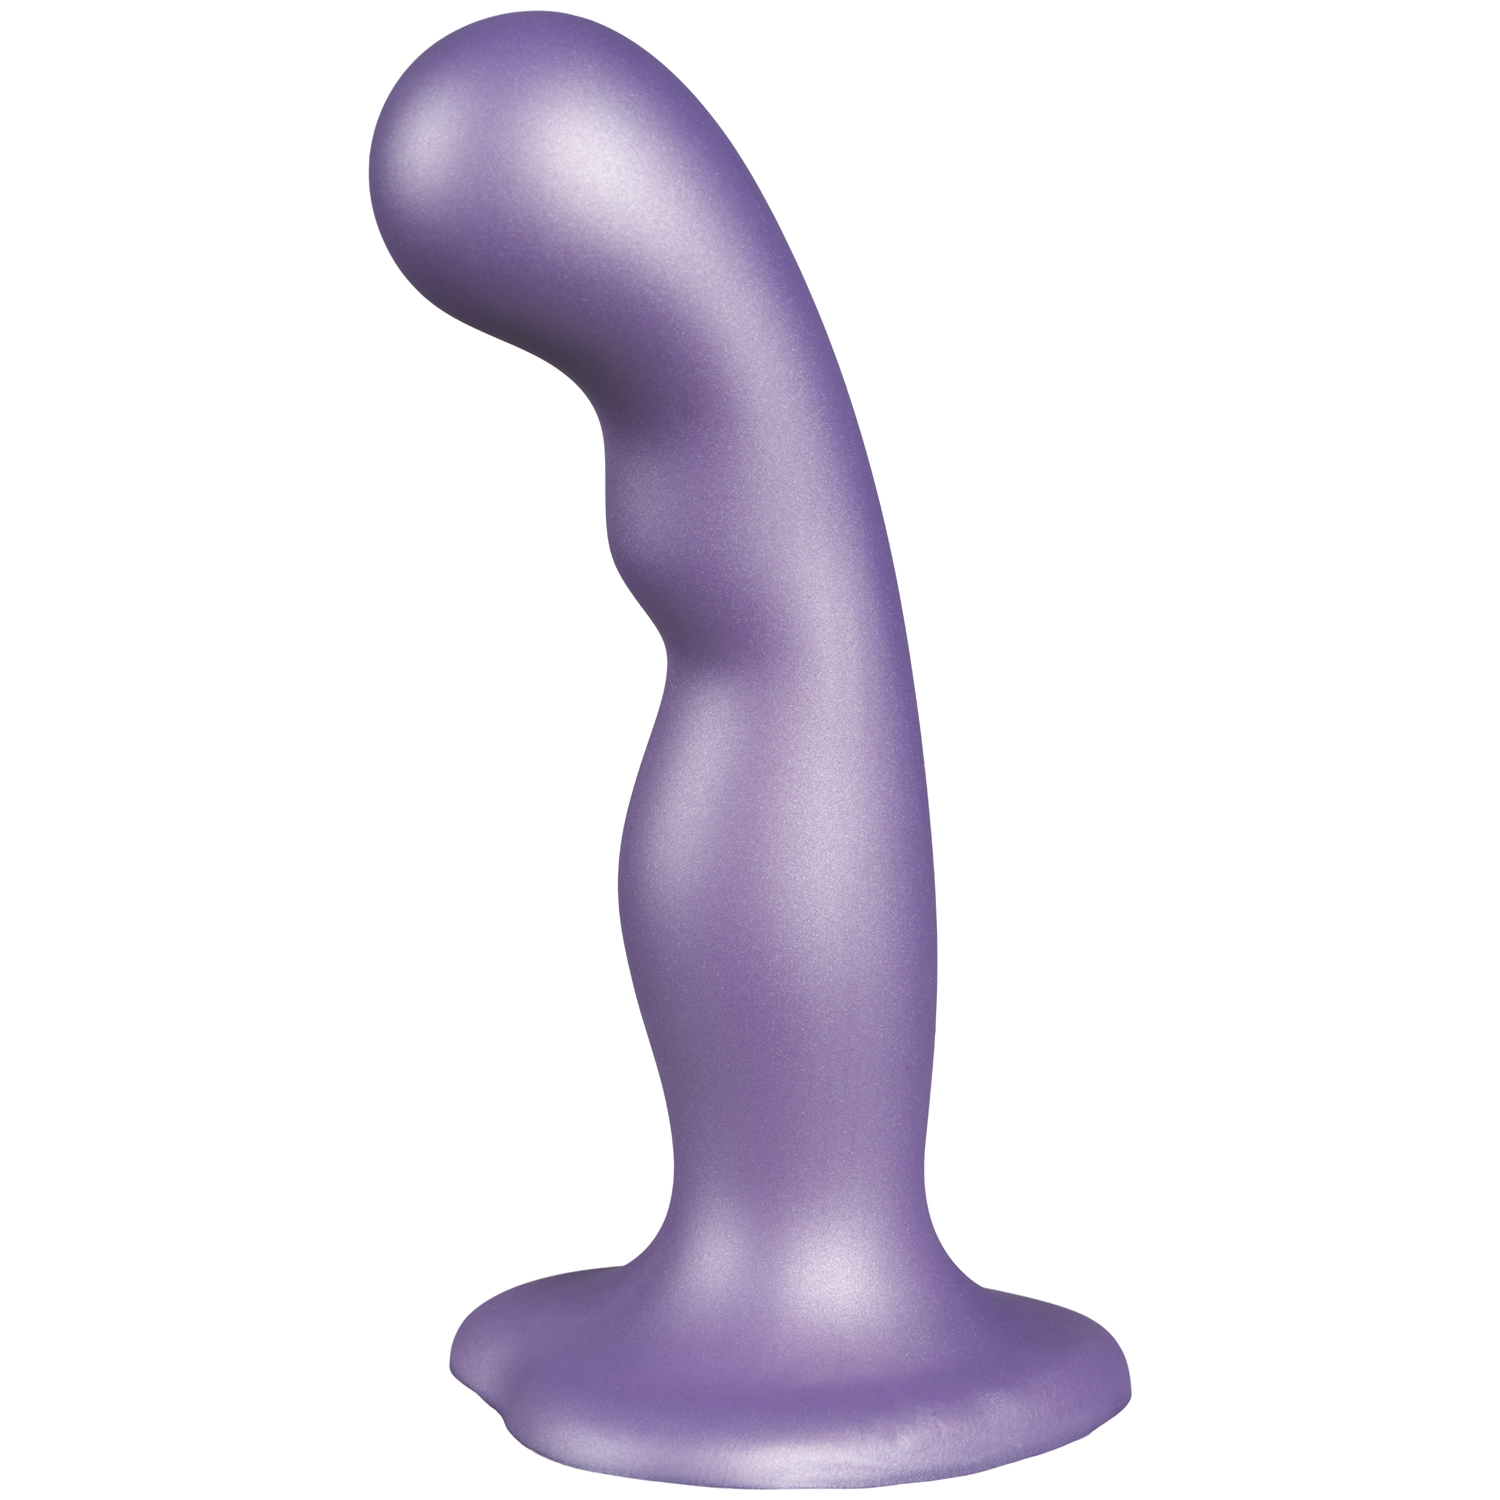 Strap-On-Me P&G Dildoplugg - Lila - L